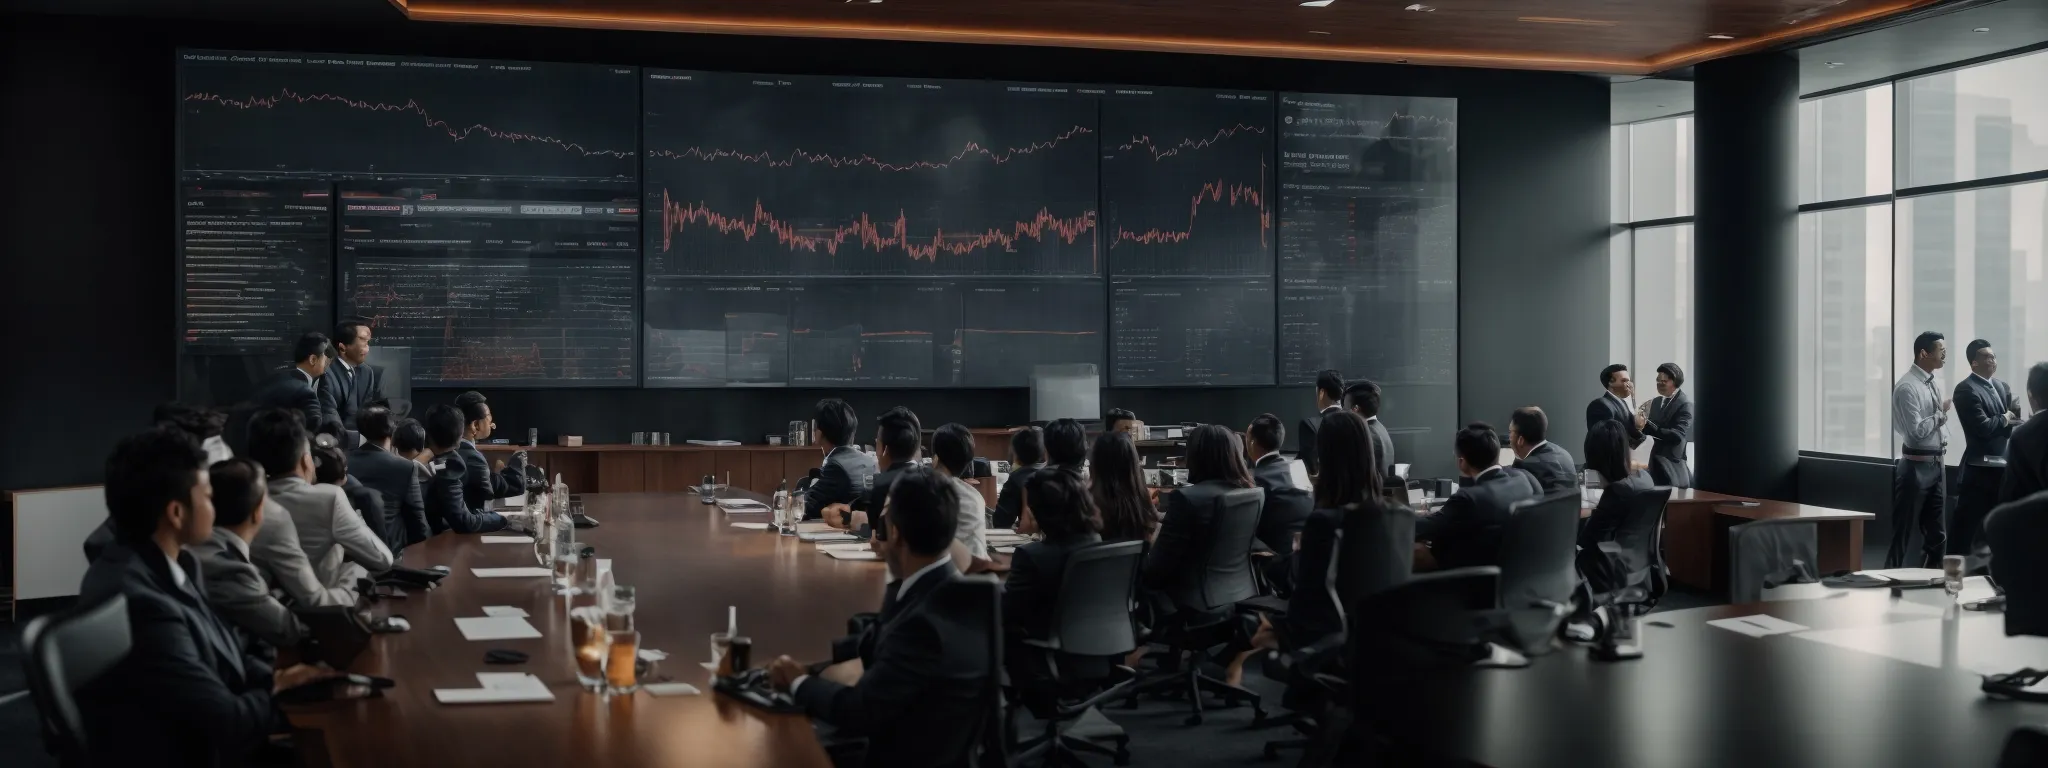 a conference room with a large screen displaying seo analytics graphs, where digital executives gather to strategize.